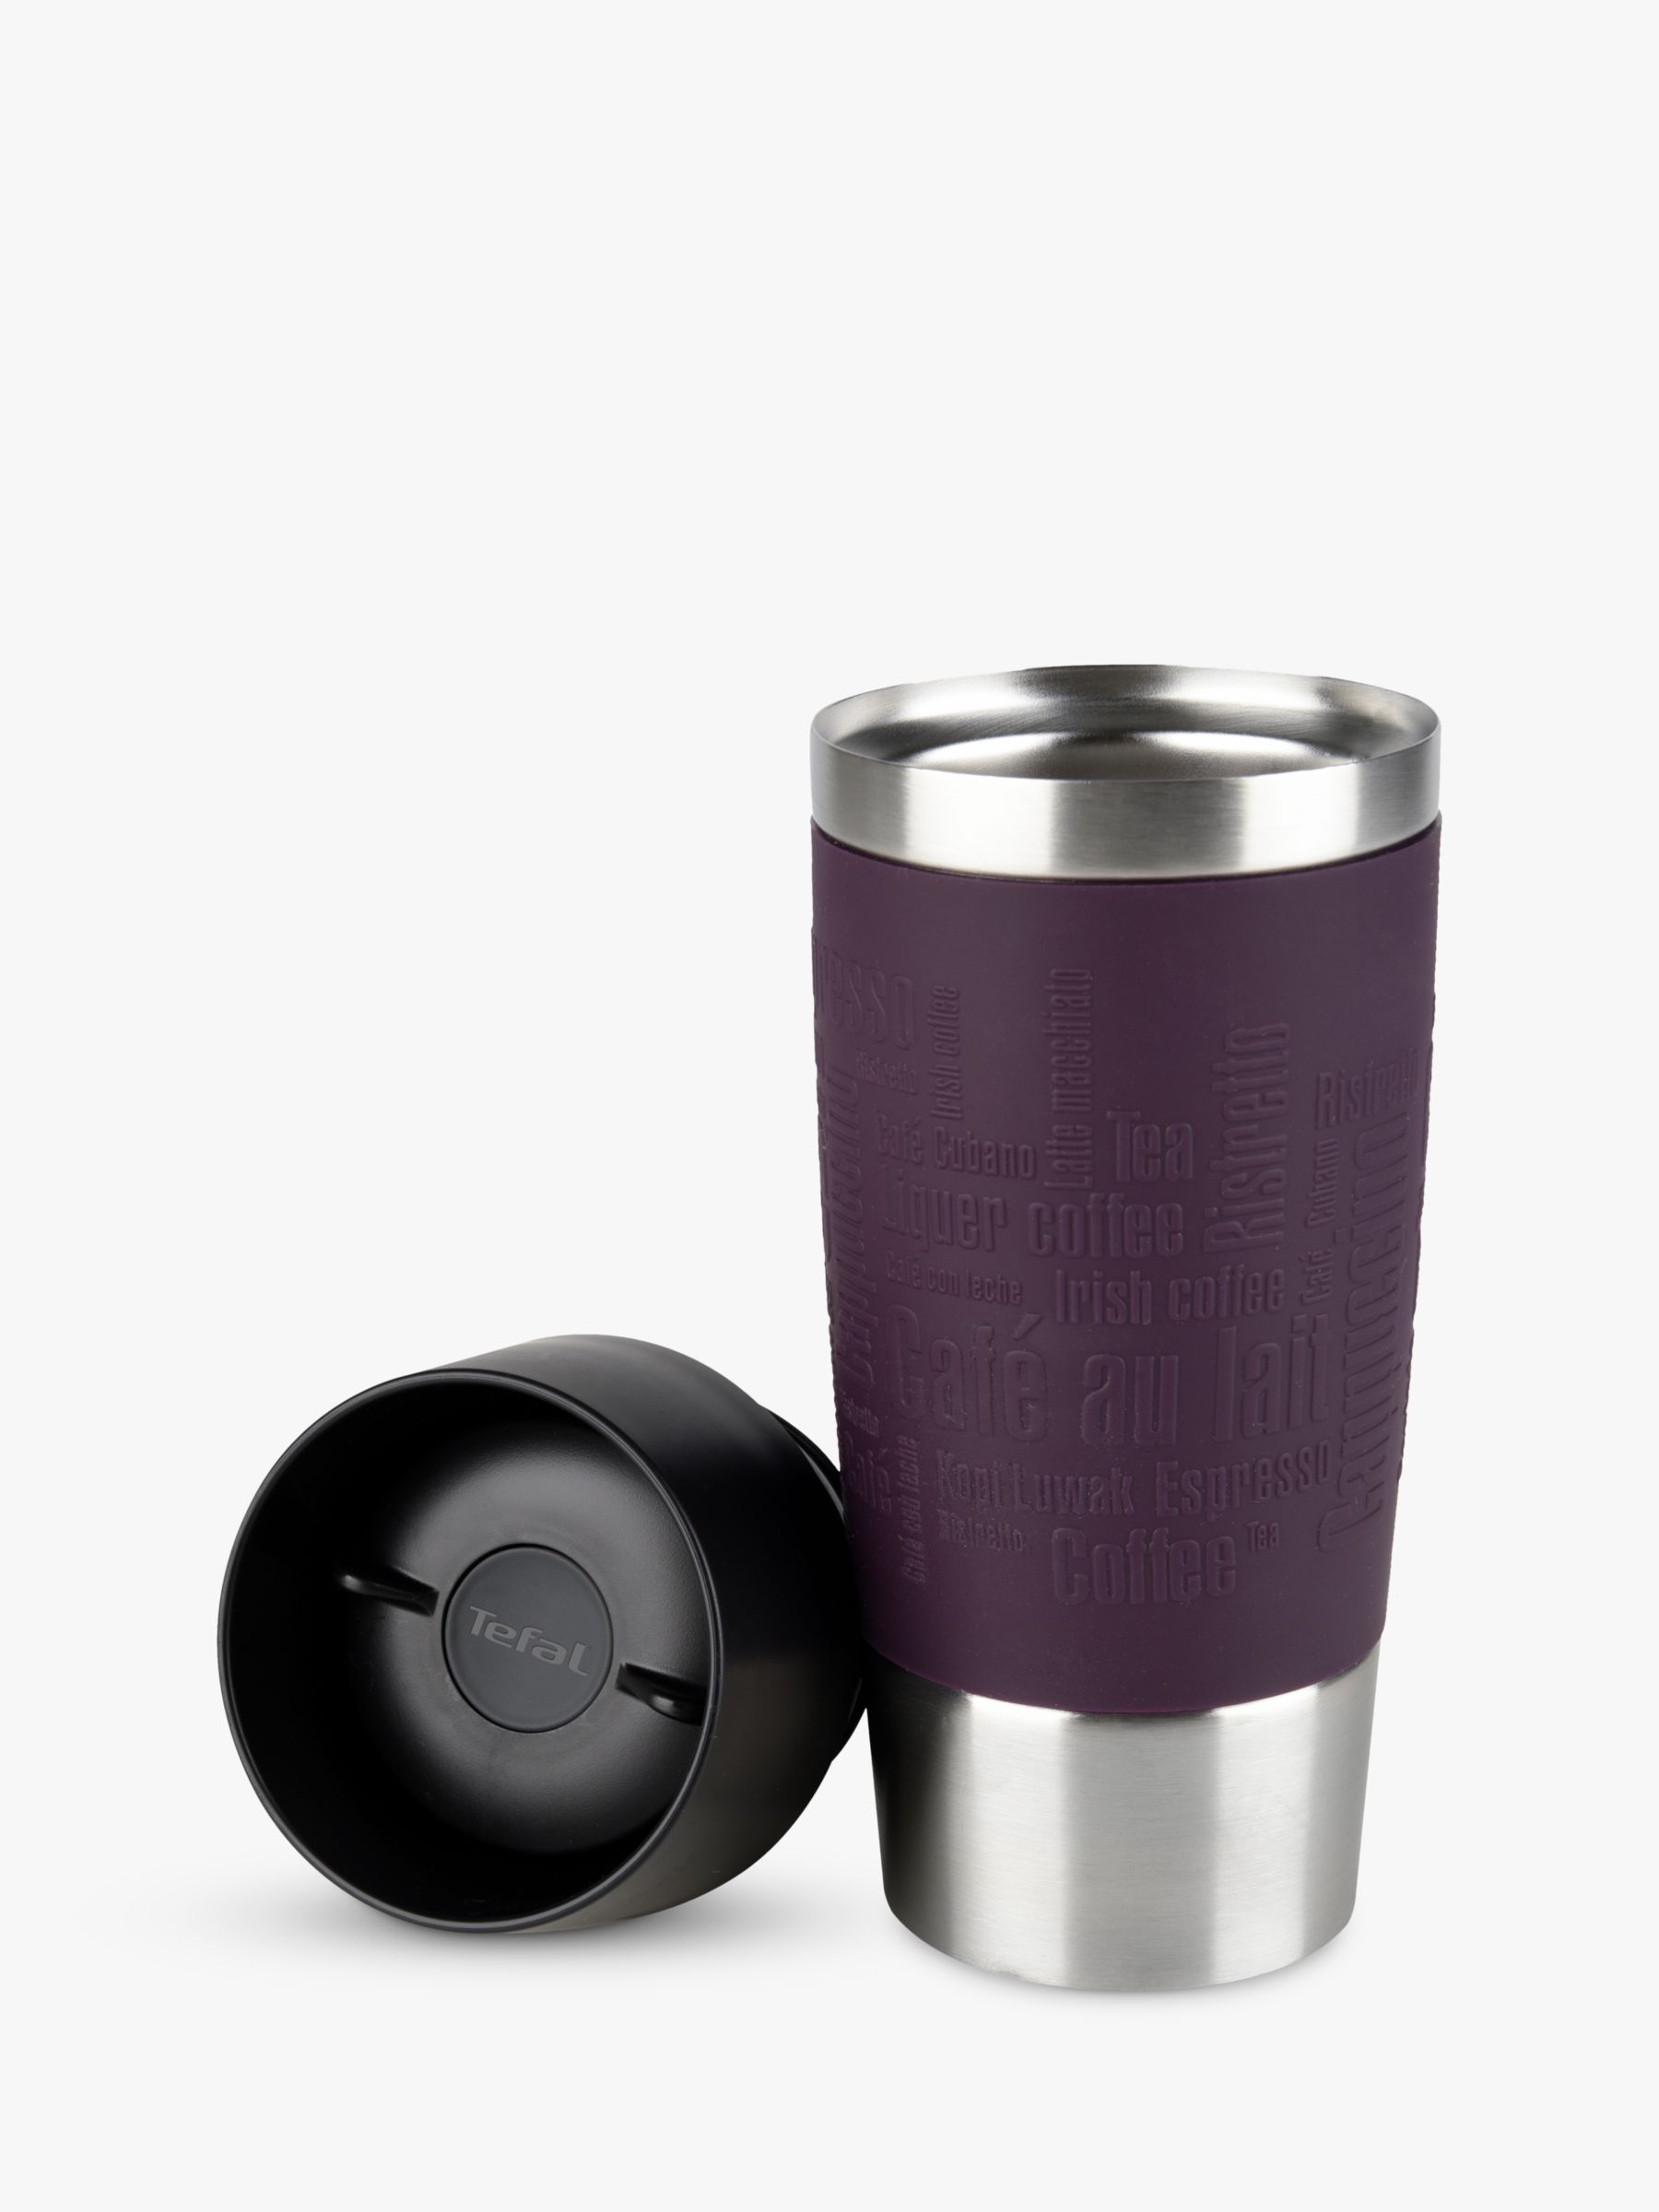 THILY 40 oz Insulated Tumbler with Handle - Stainless Steel Coffee Travel  Mug with Lid and Straws, K…See more THILY 40 oz Insulated Tumbler with